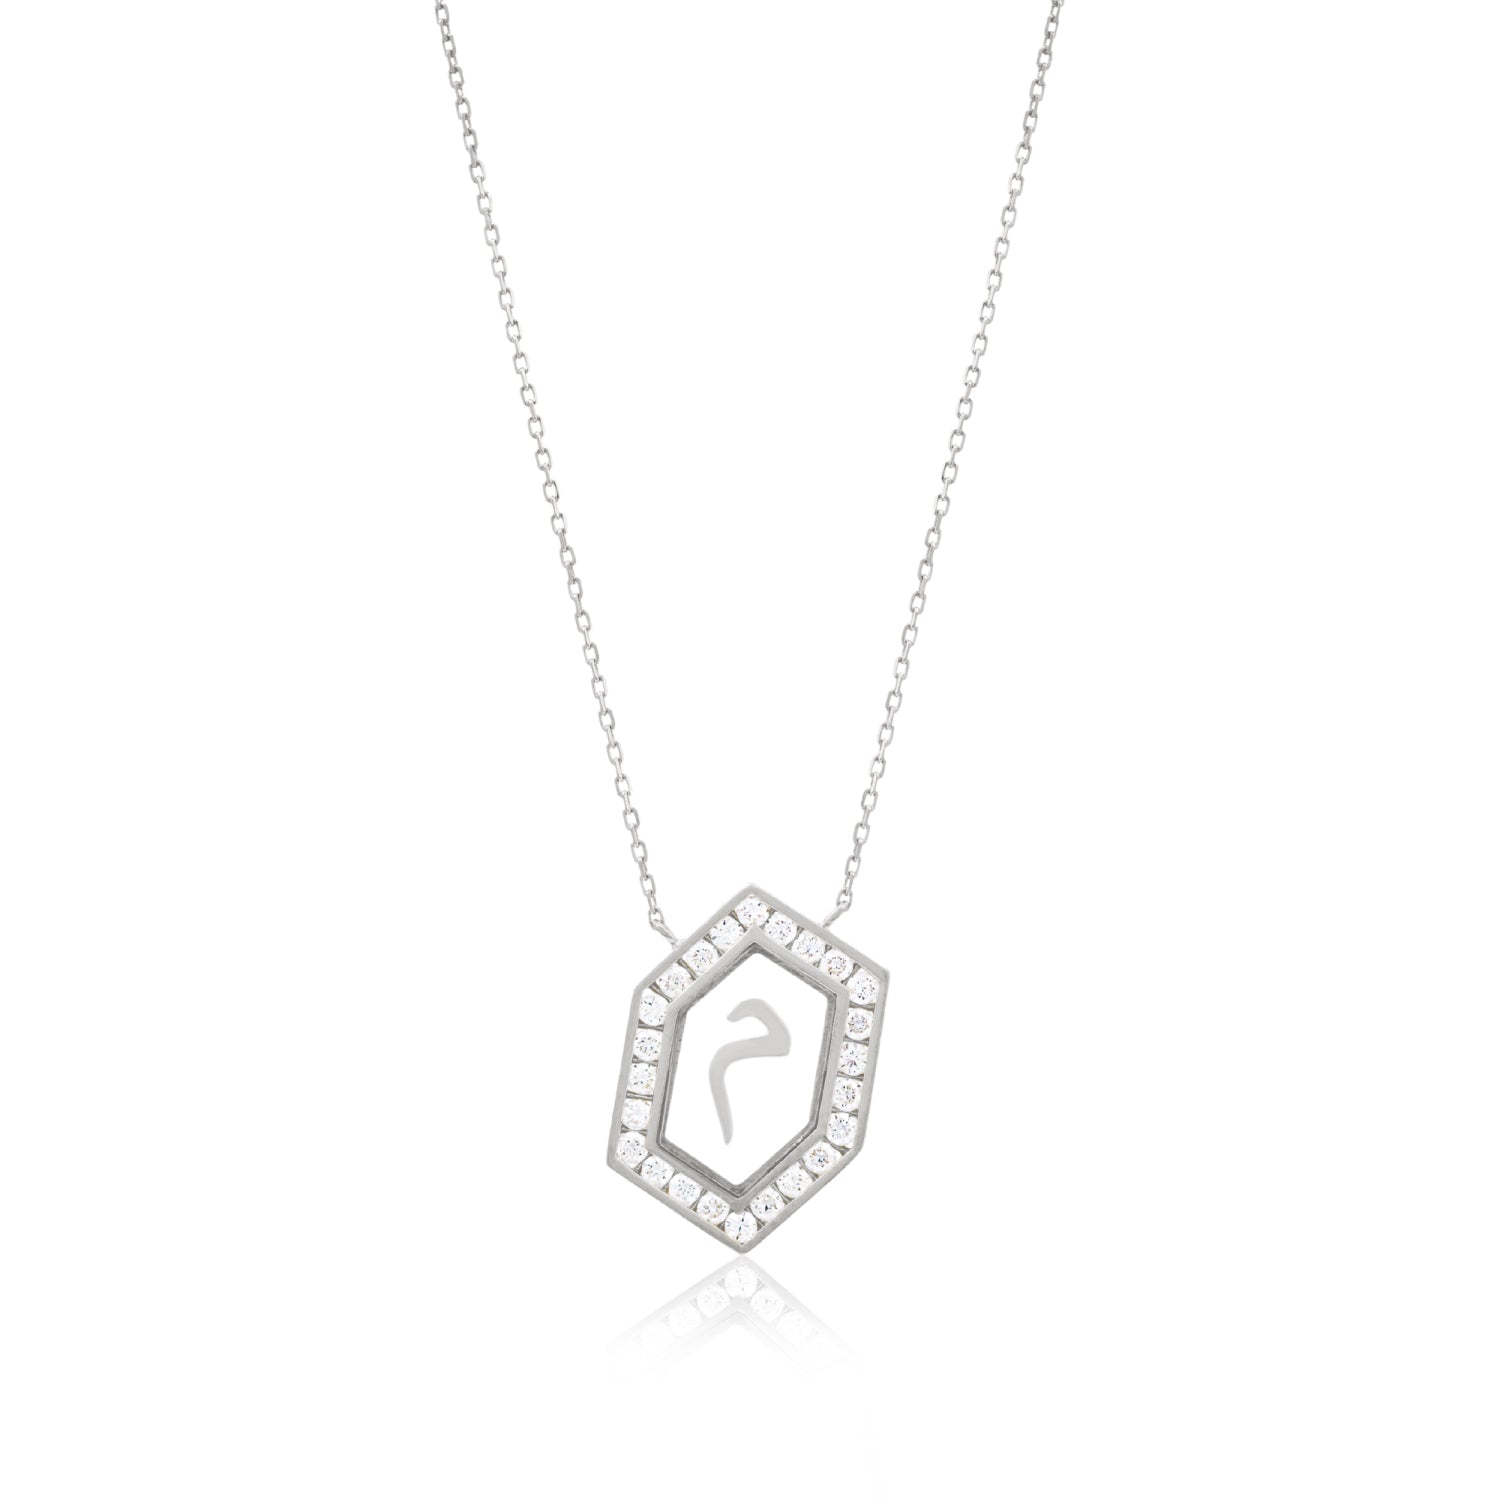 Qamoos 1.0 Letter م Diamond Necklace in White Gold